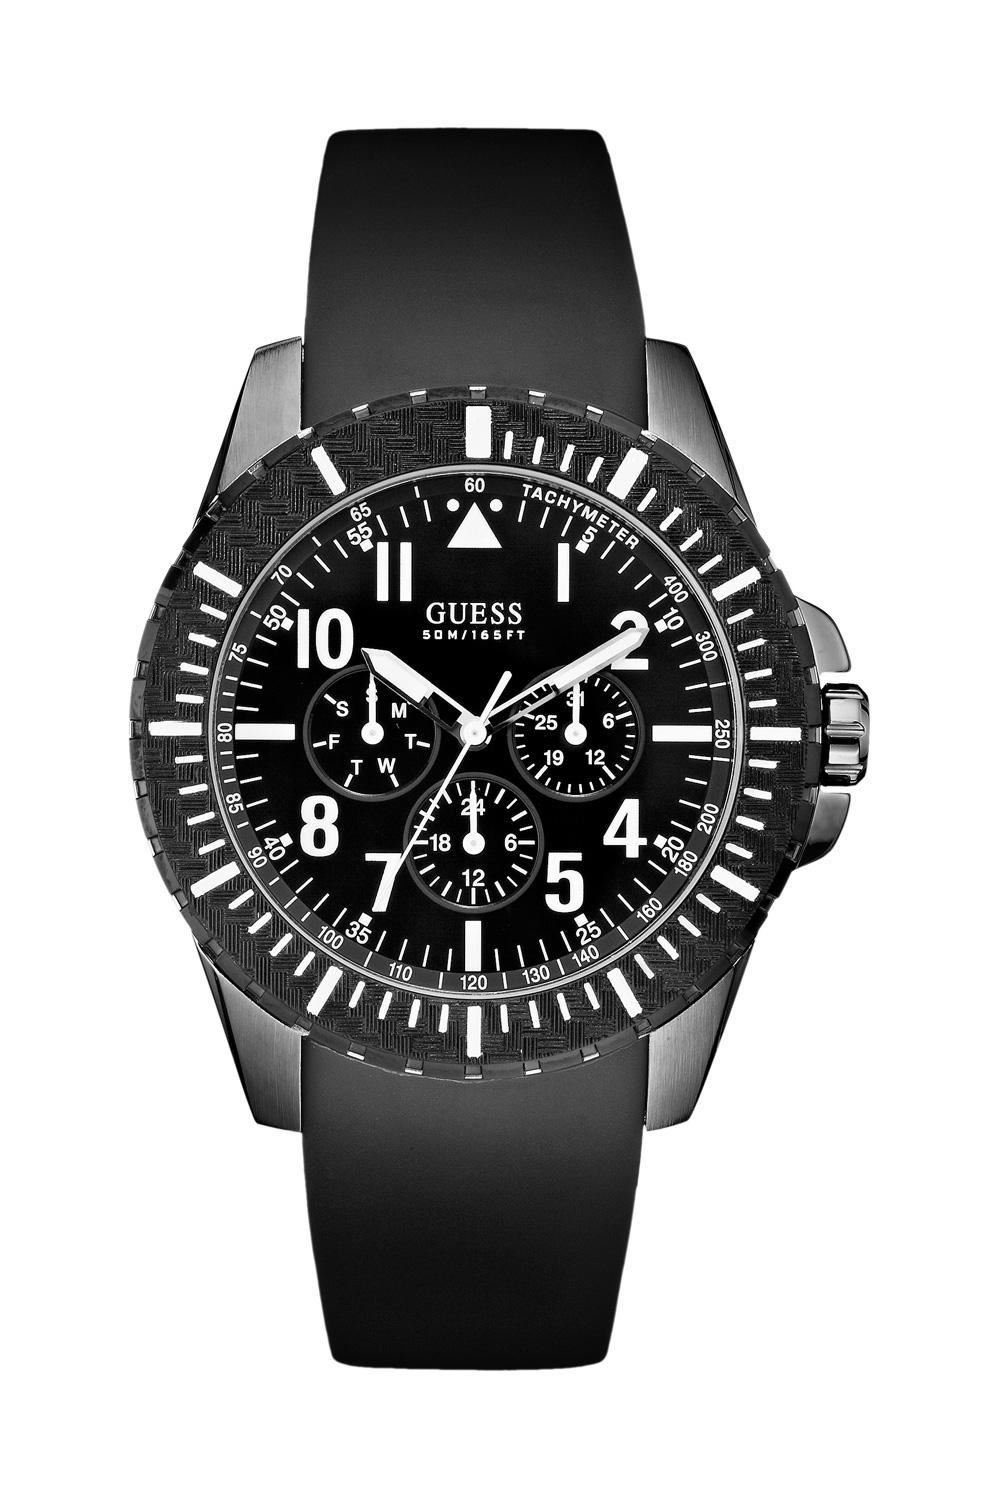 Guess Multifunktionsuhr Rogue W10261G1, Multifunktion, 24-Std. Anzeige, Tachymeter